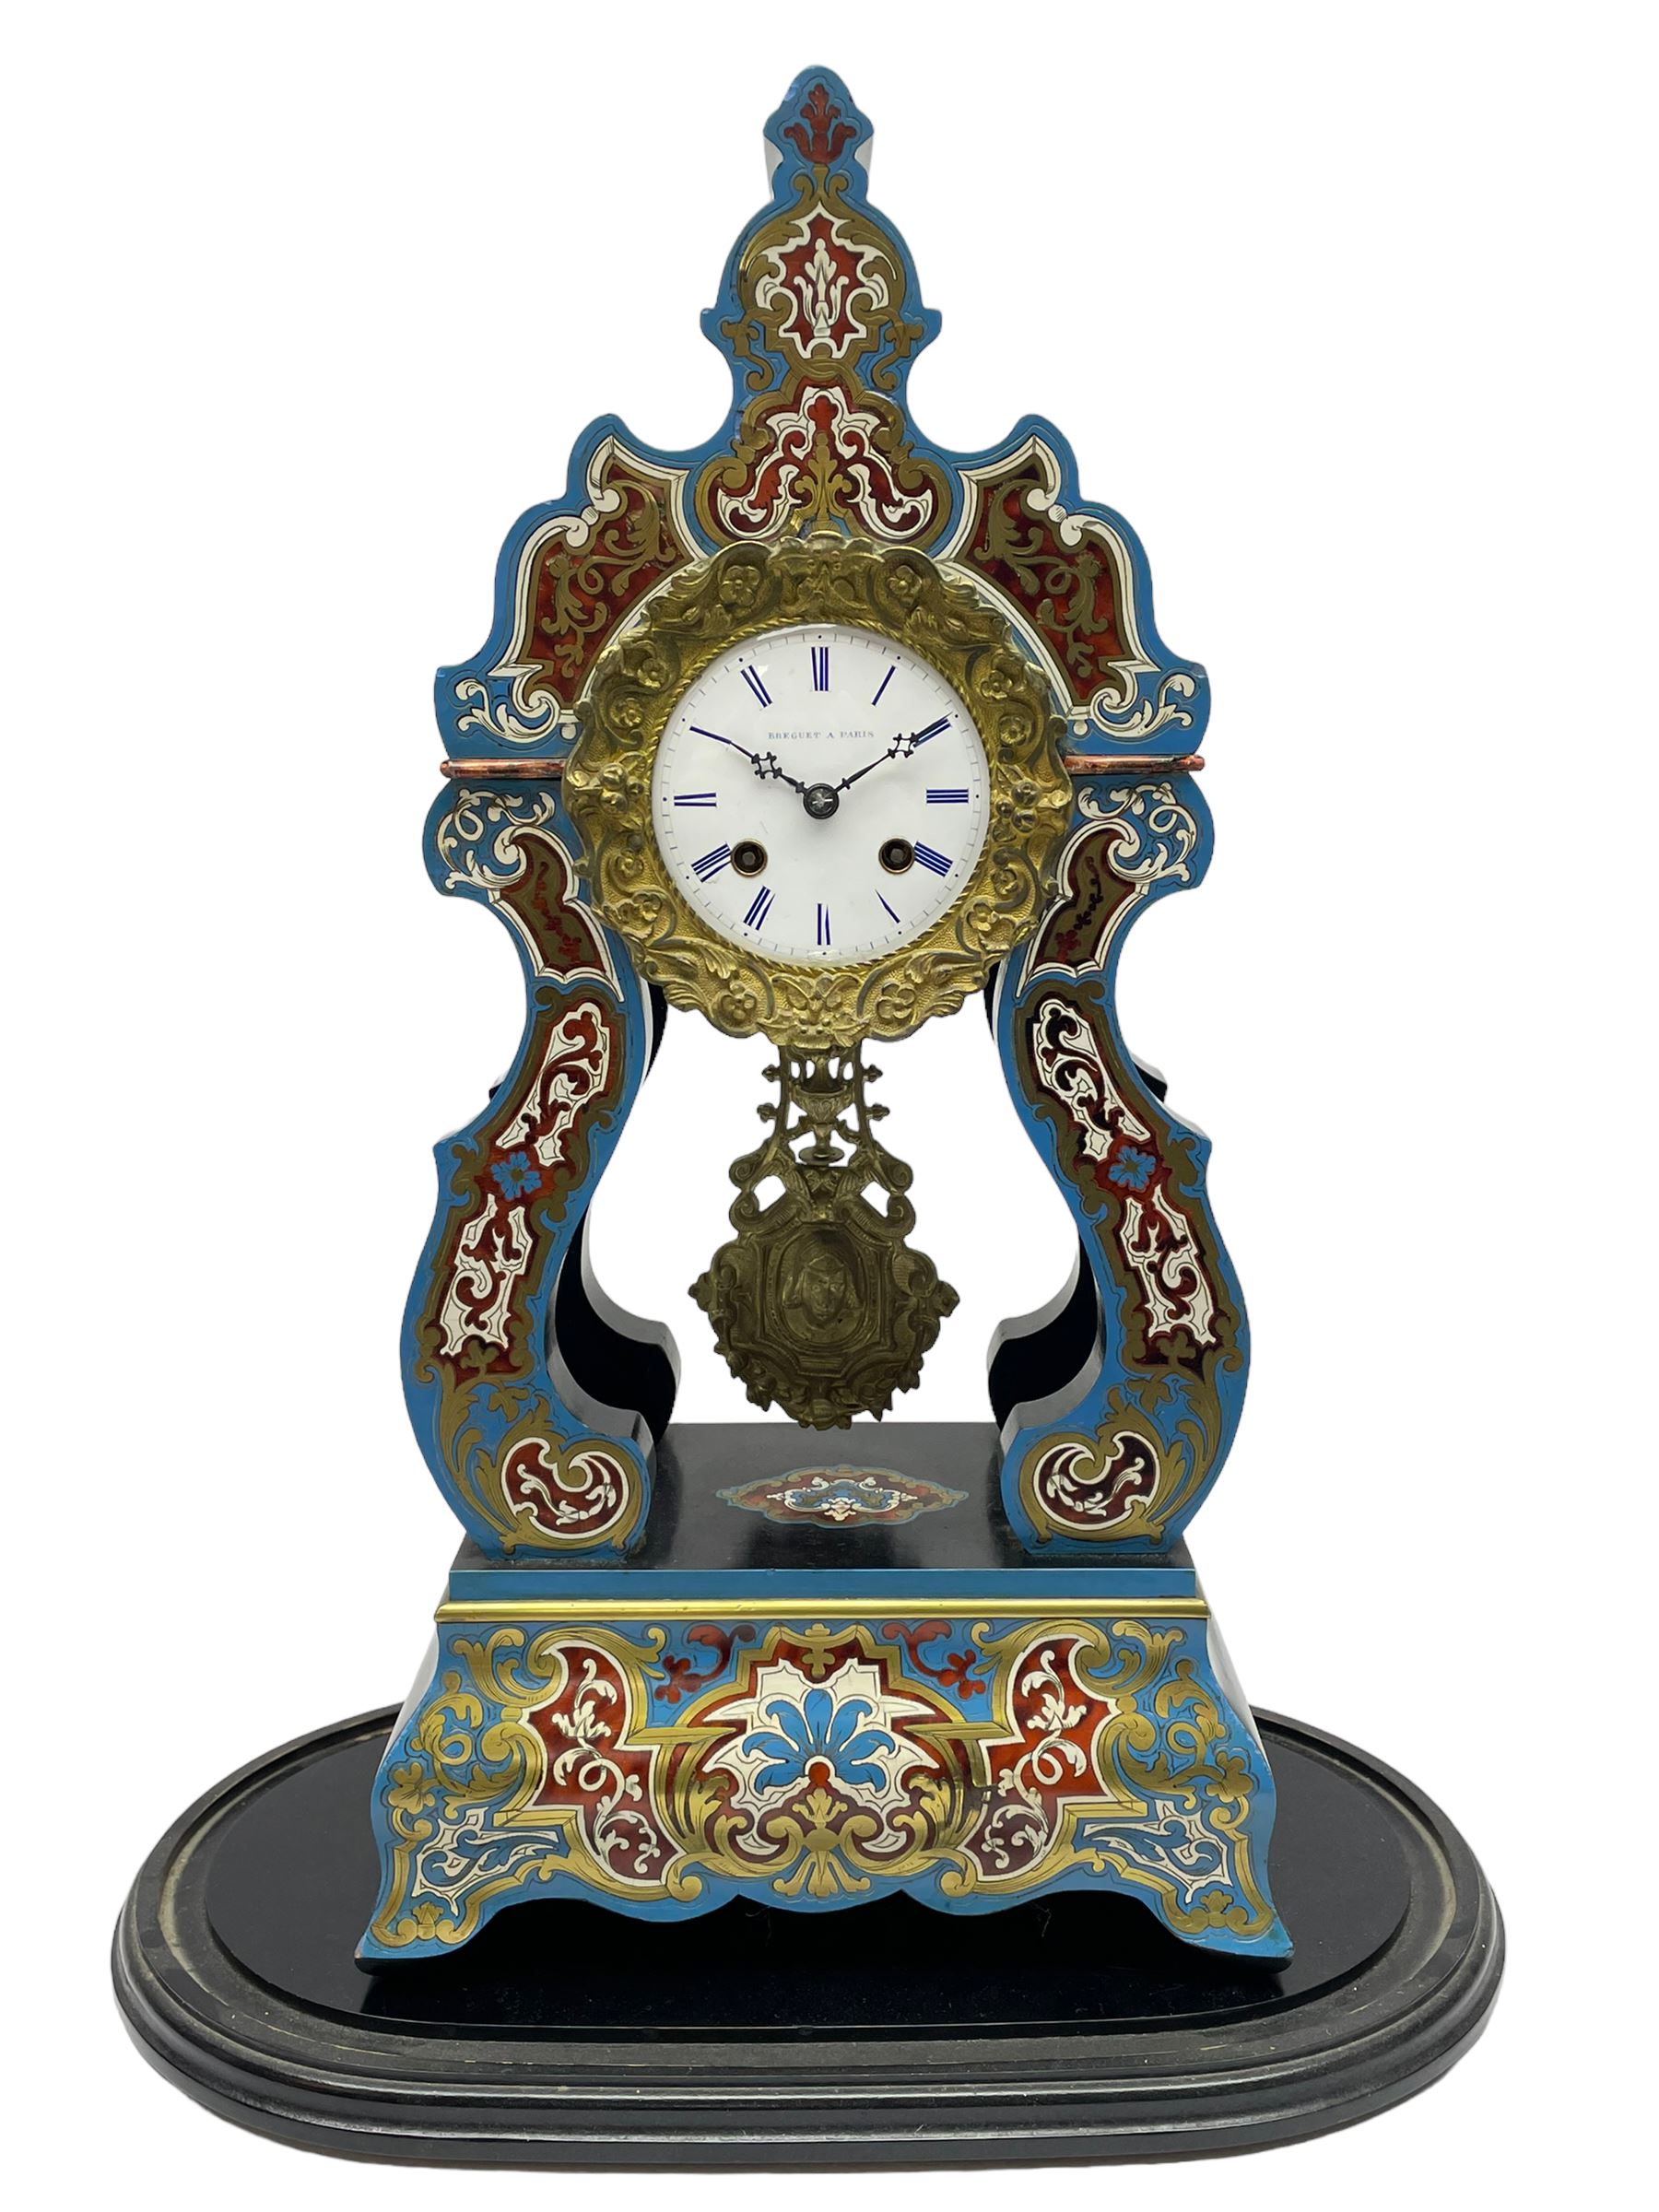 Breguet A Paris - Mid-19th century 8-day French portico clock